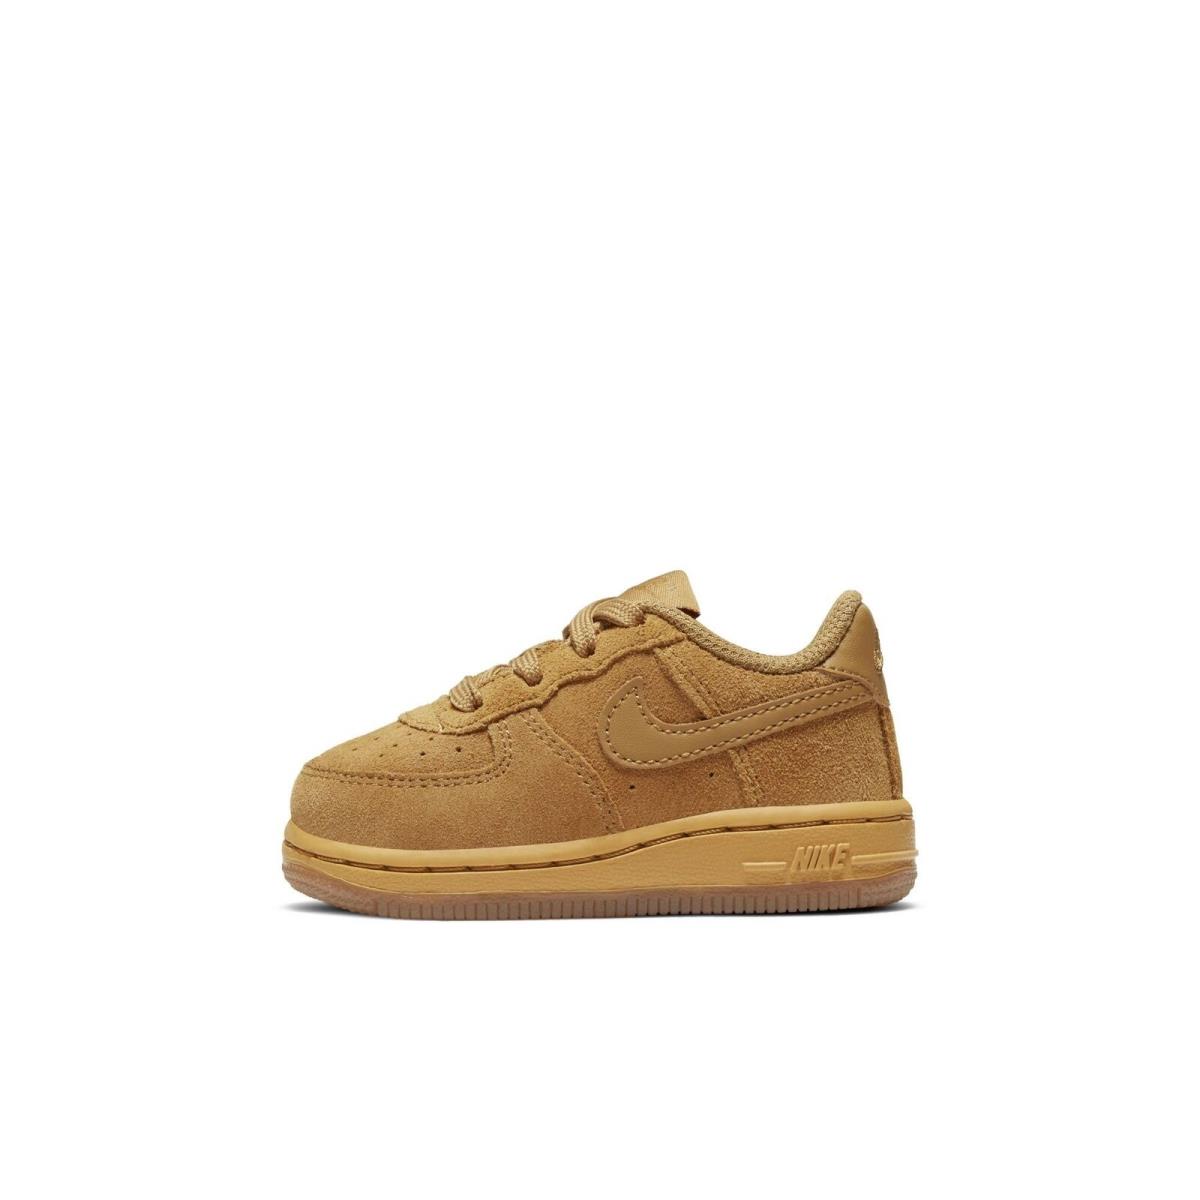 BQ5487-700 Nike Toddlers Air Force 1 Low LV8 TD `wheat 2019 ` - Brown